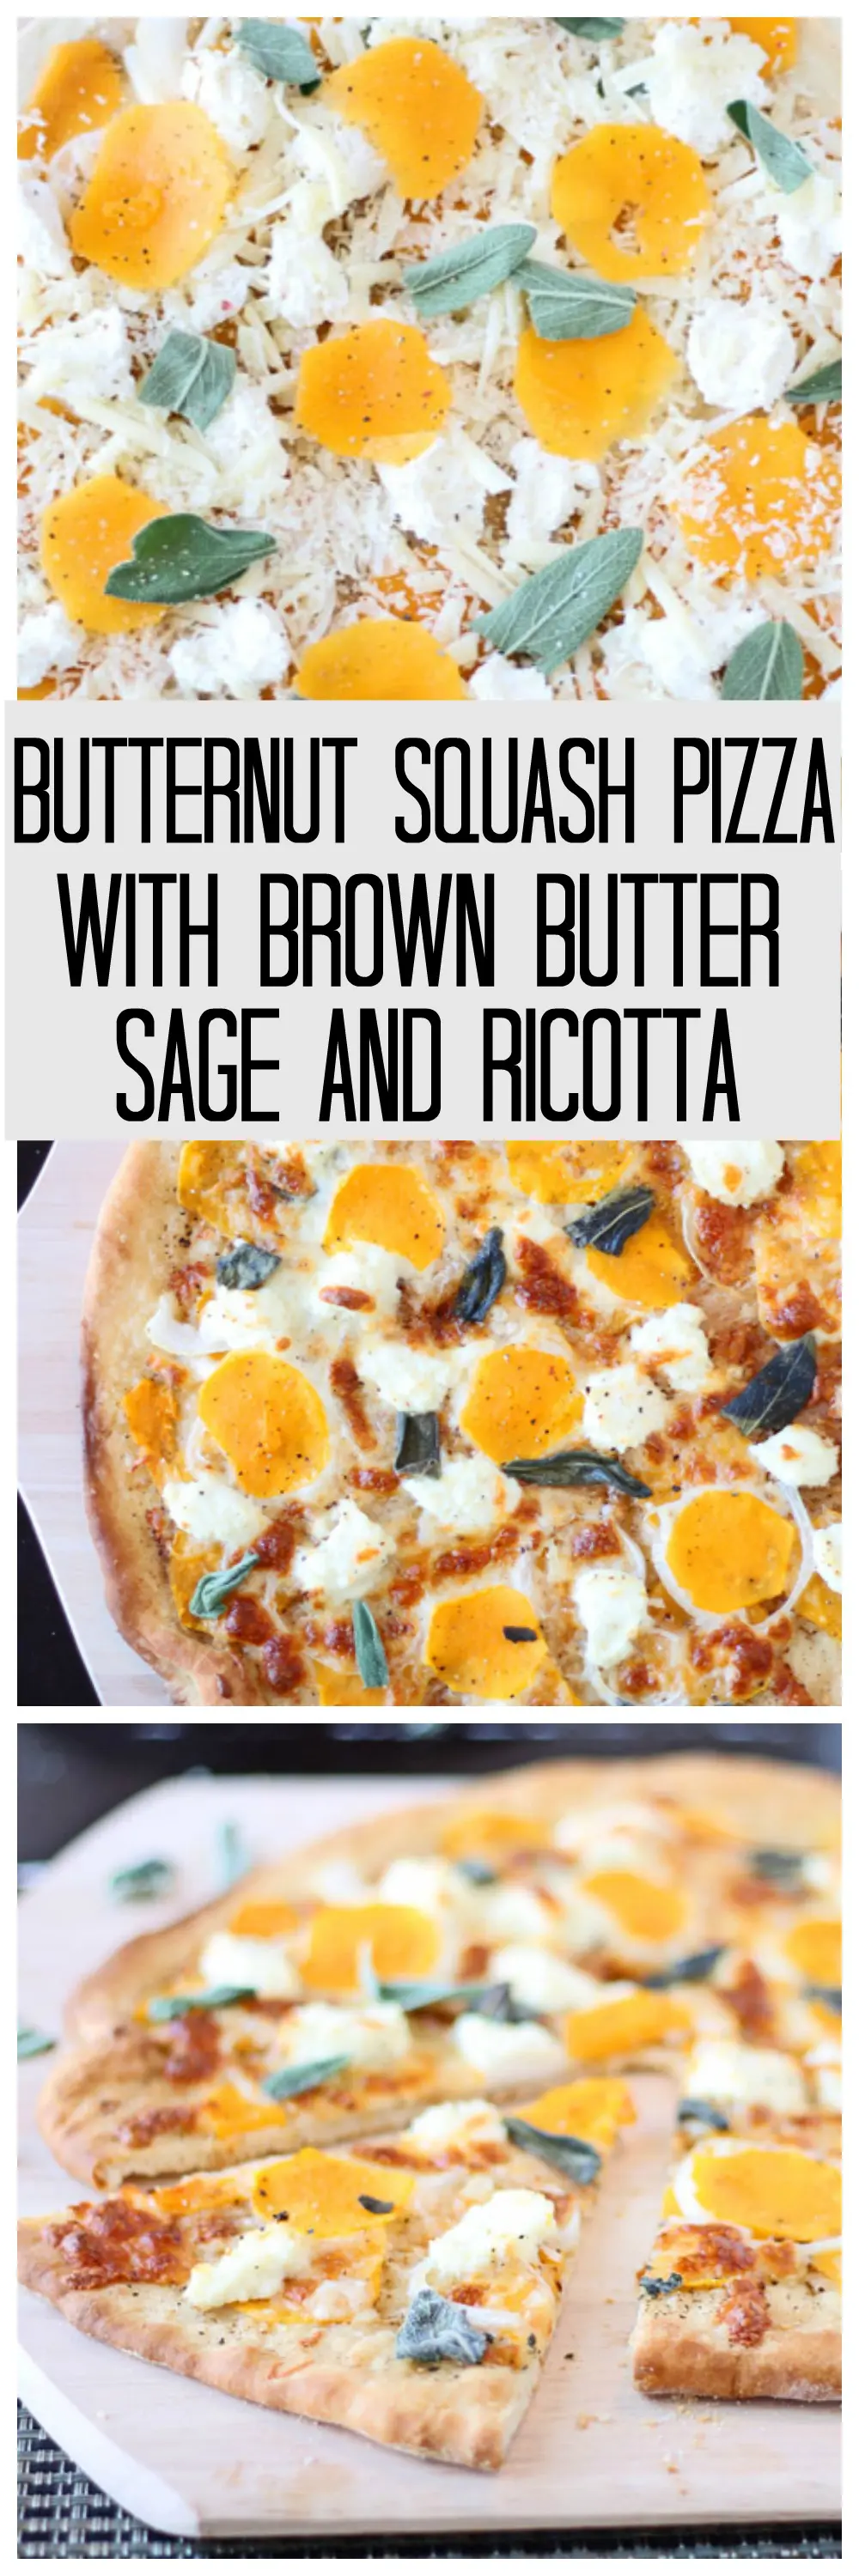 Buternut Squash Pizza with Brown Butter, Sage and Ricotta